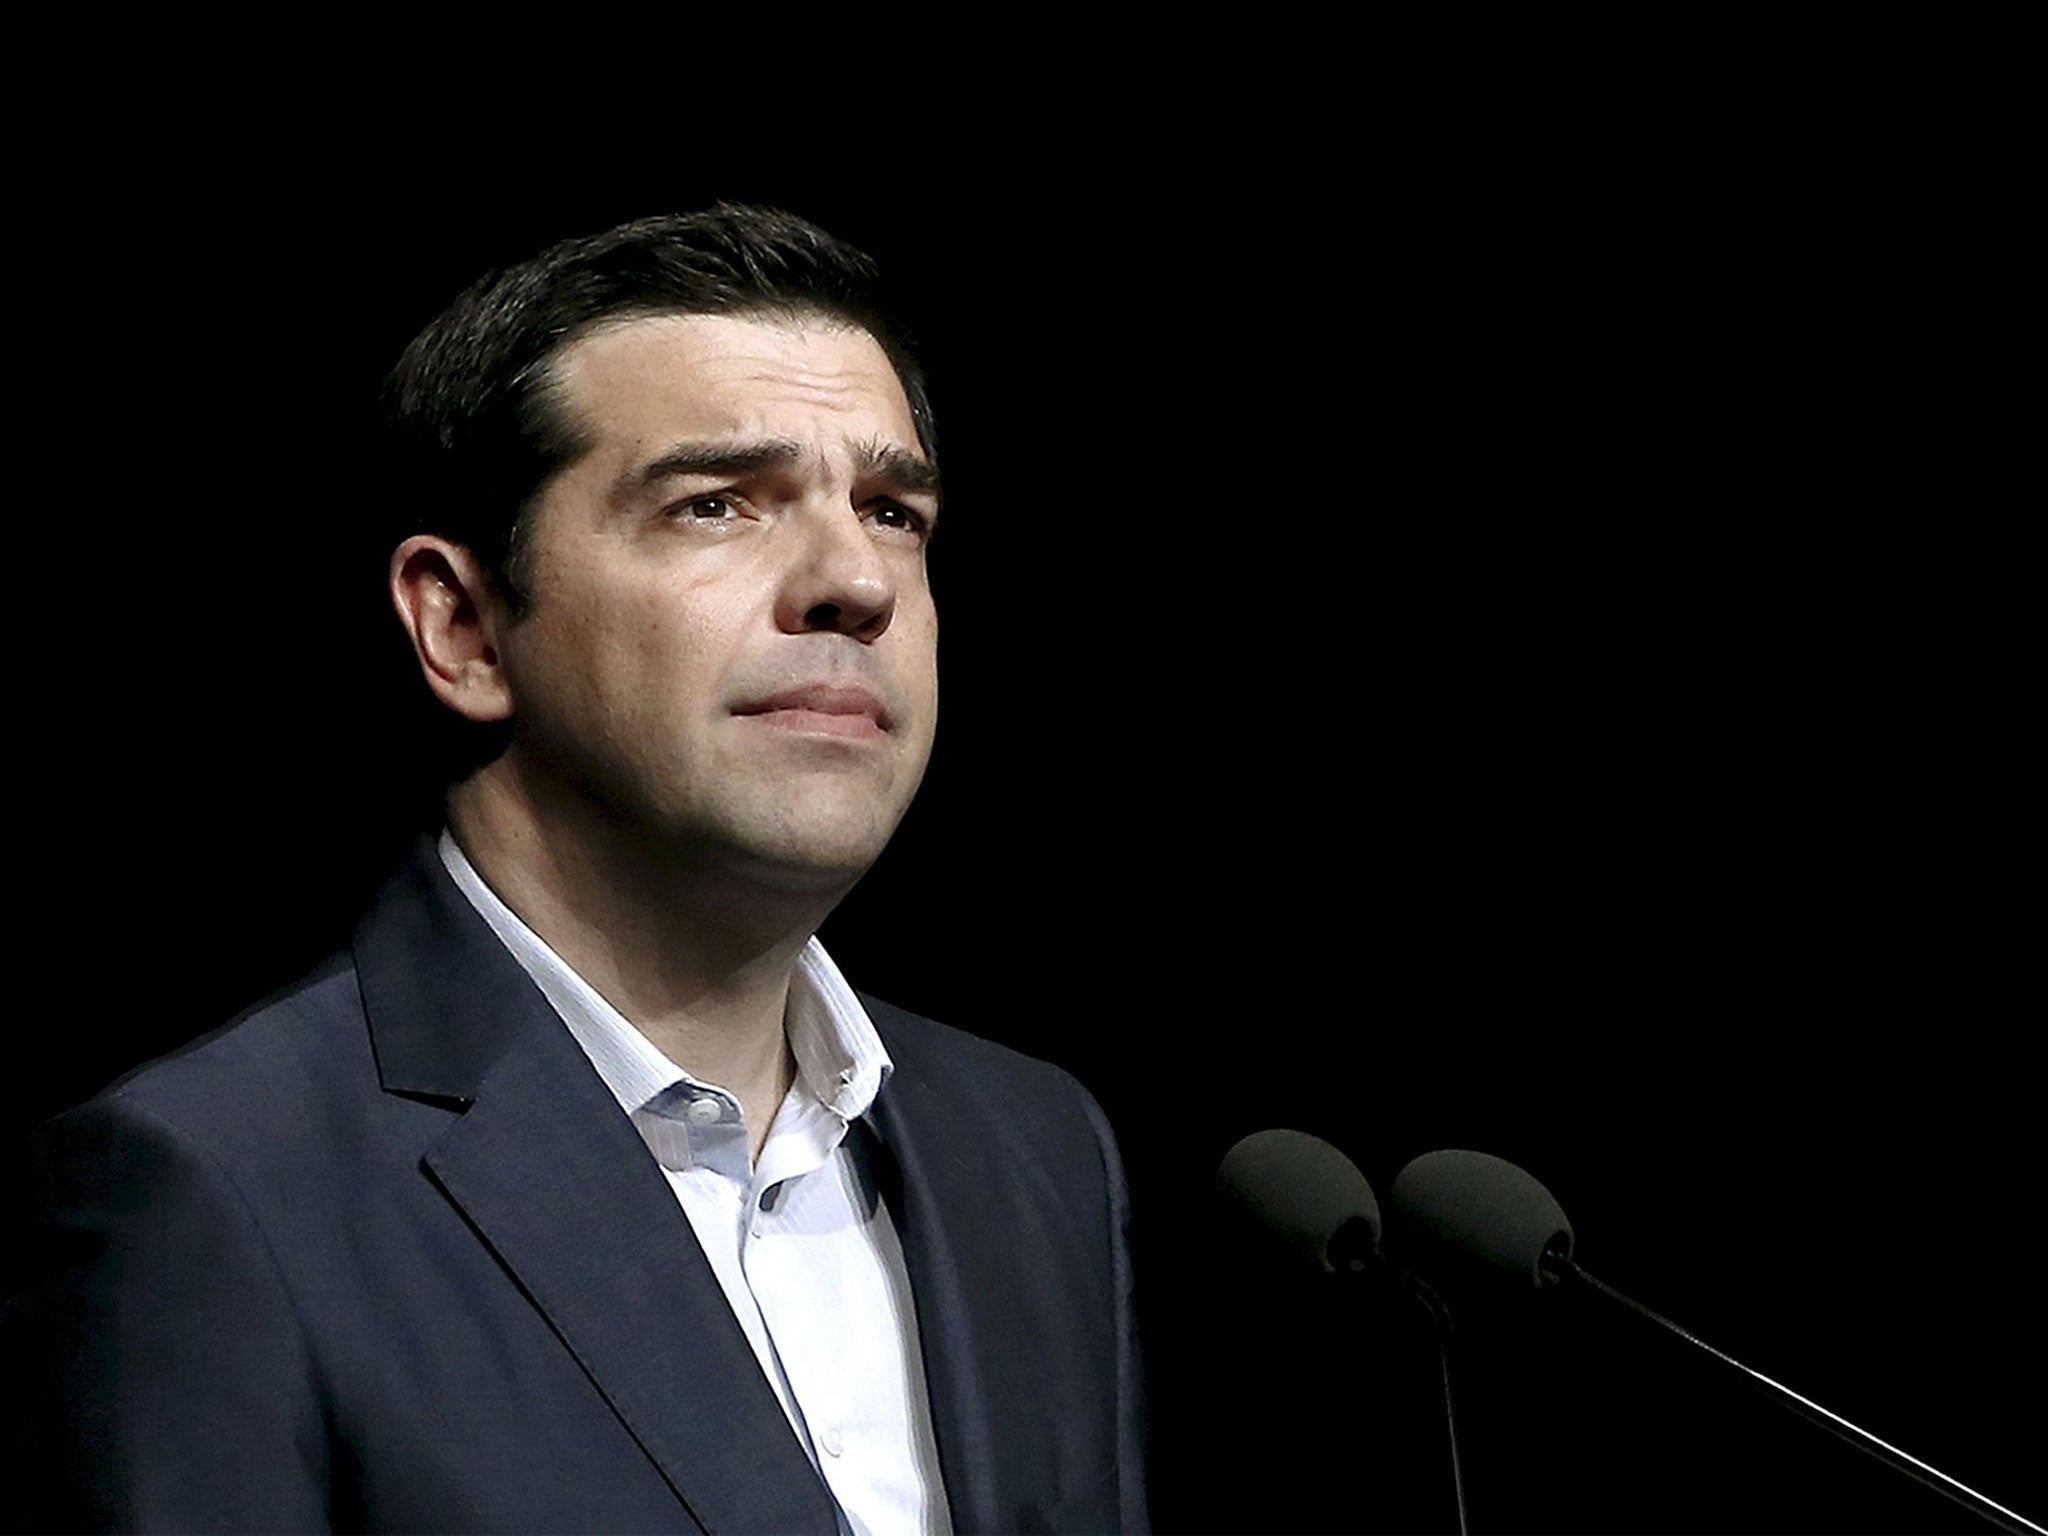 Tsipras effectively lost his majority when members of his Syriza party rebelled against his bailout agreement with international lenders